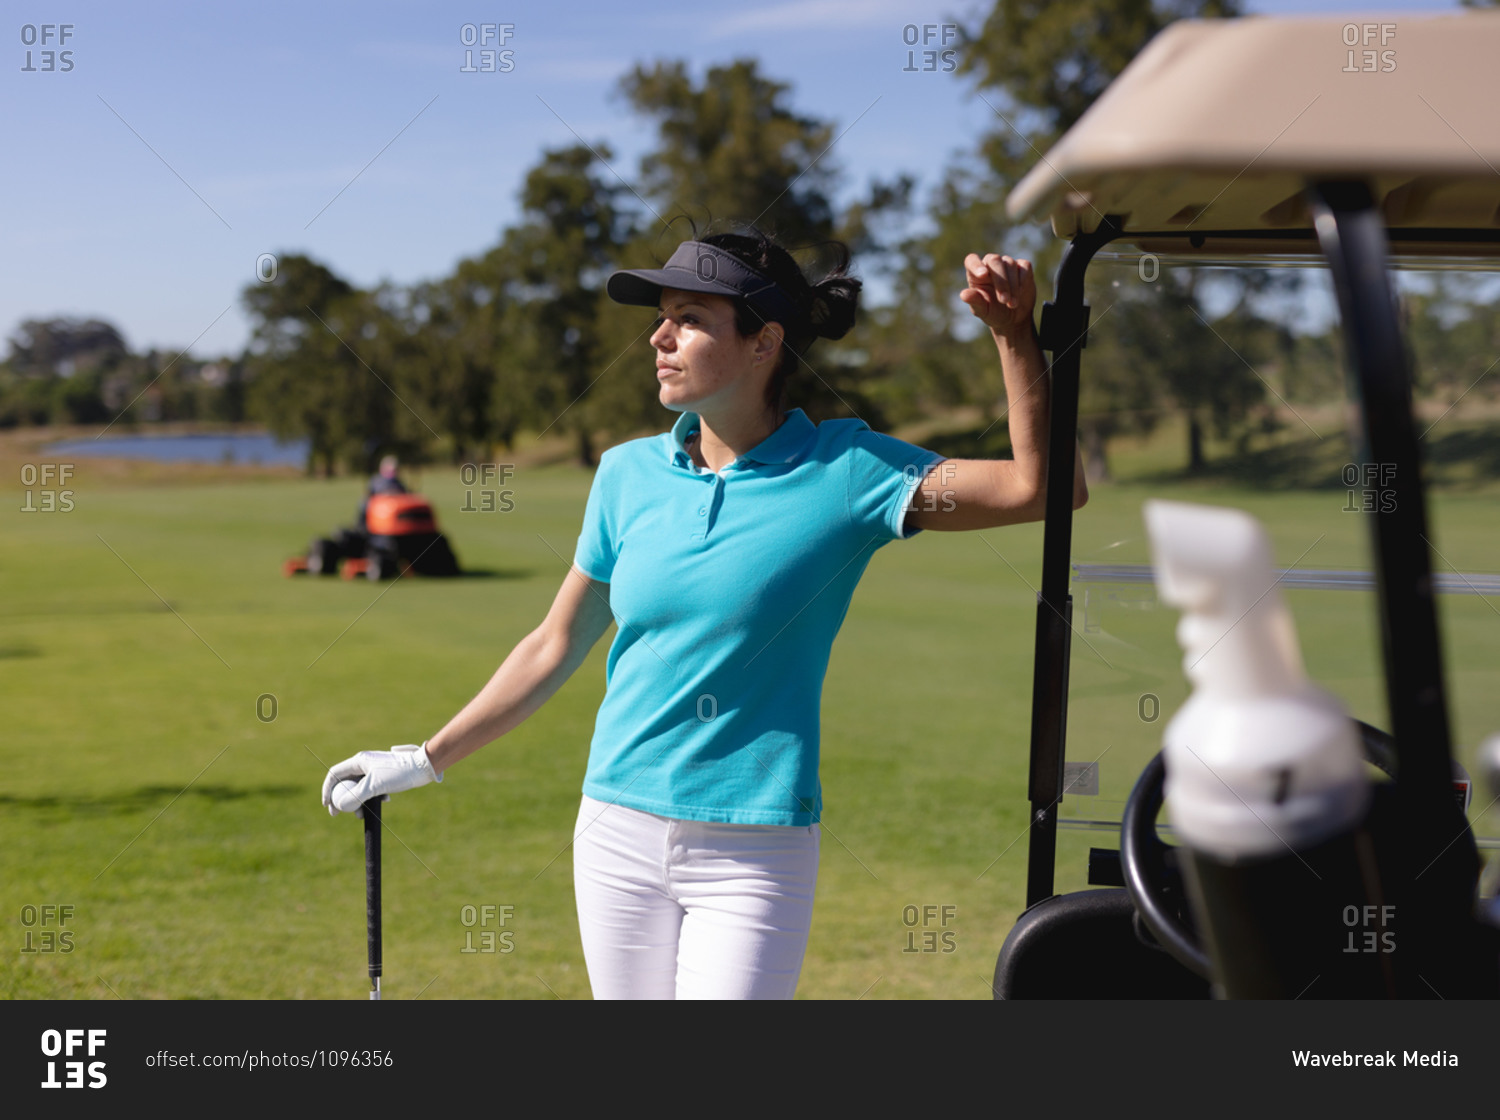 Caucasian woman playing golf leaning on golf cart at golf course. sport leisure hobbies golf healthy outdoor lifestyle.